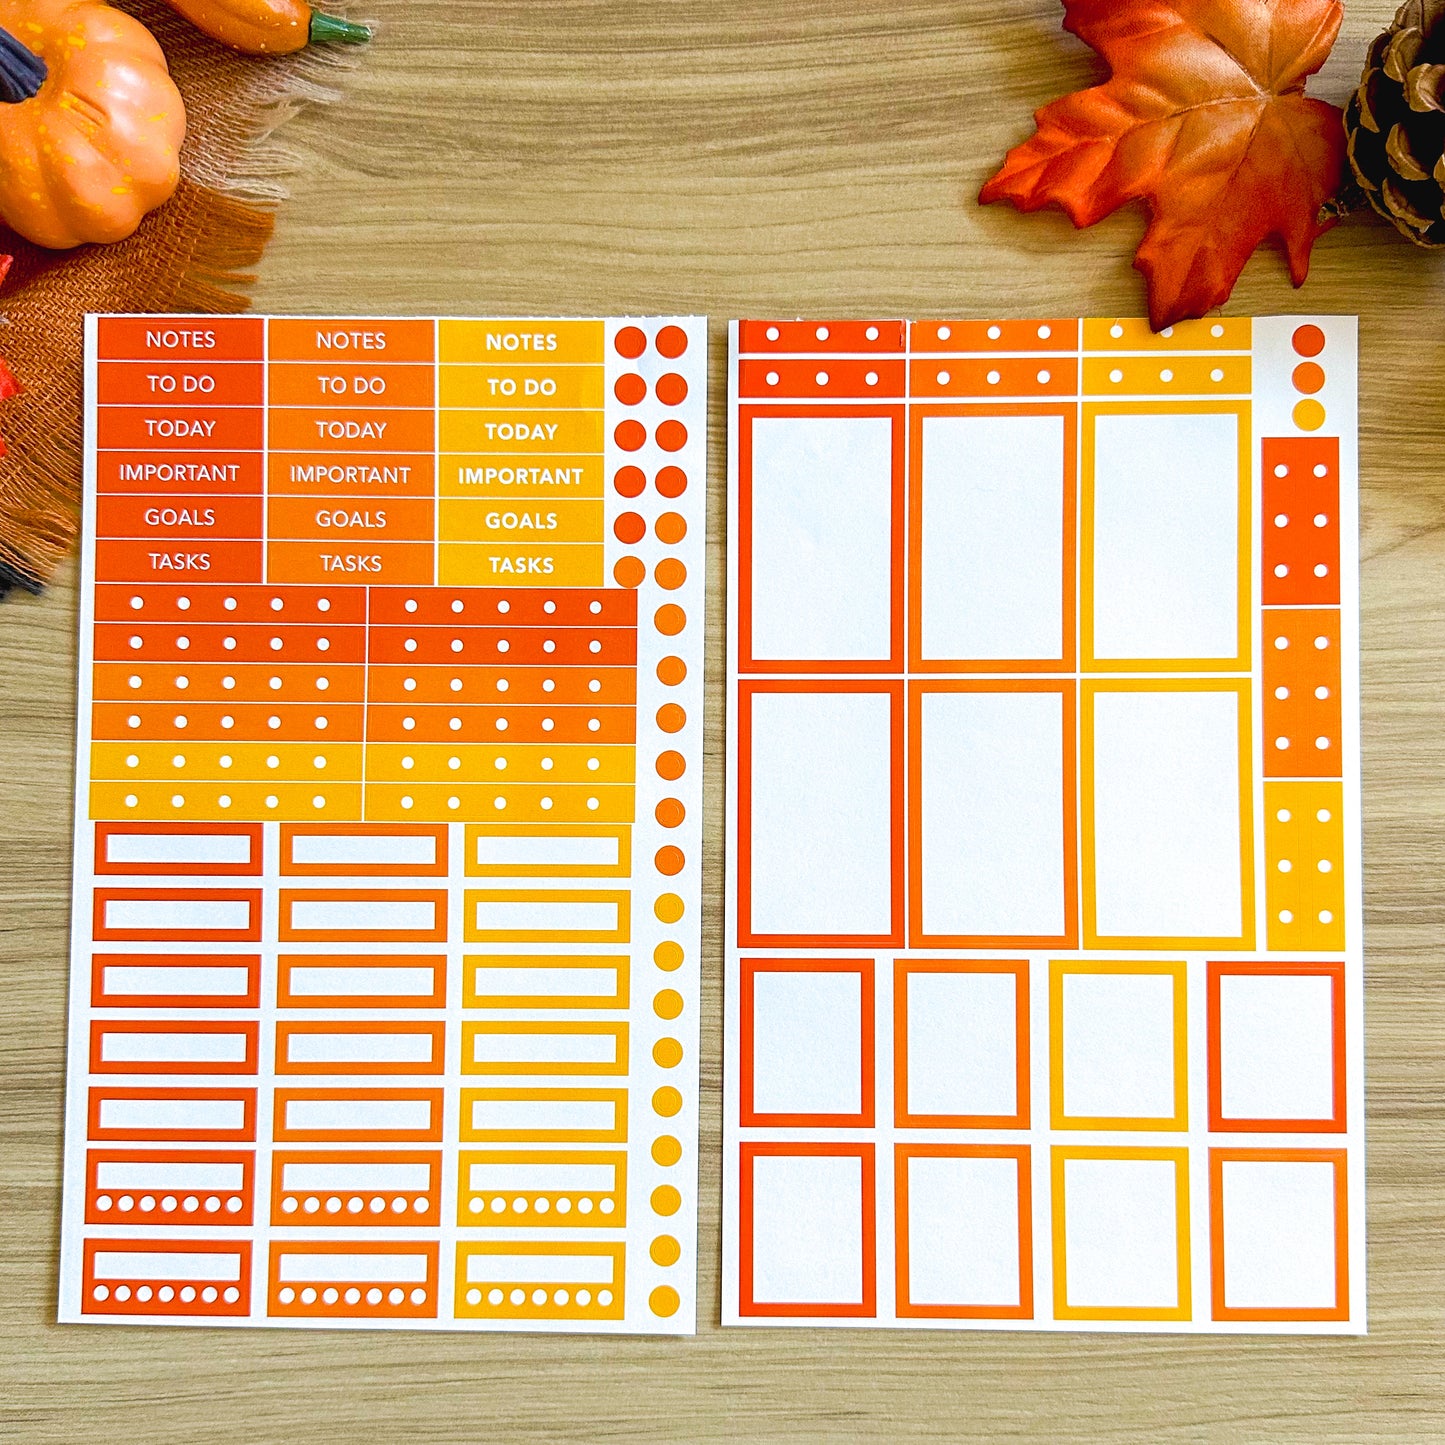 LLP: "Chic Fall" DELUXE Sticker Book